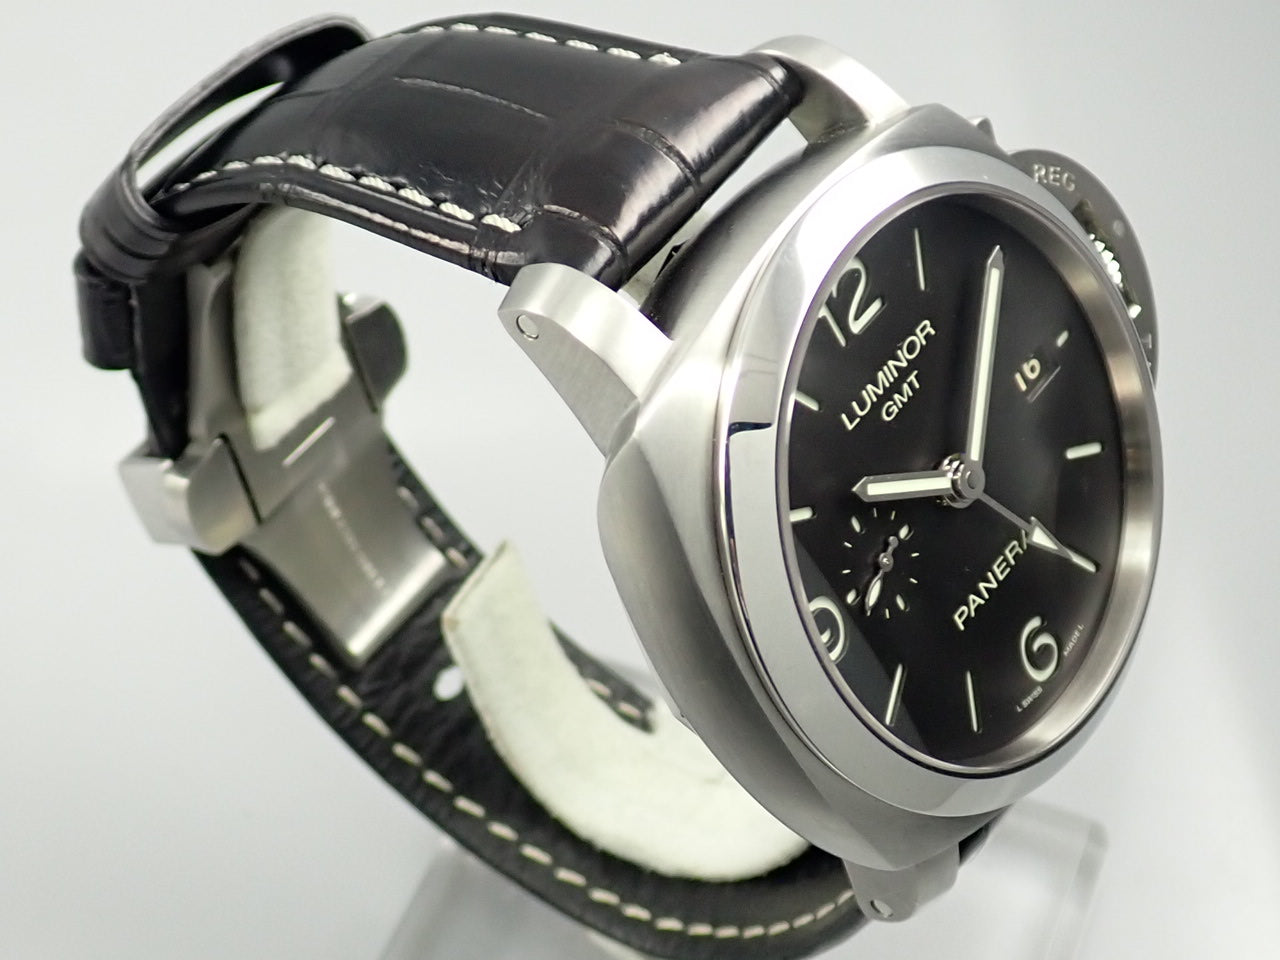 Panerai Luminor 1950 3 Days GMT &lt;Warranty Box and Others&gt;